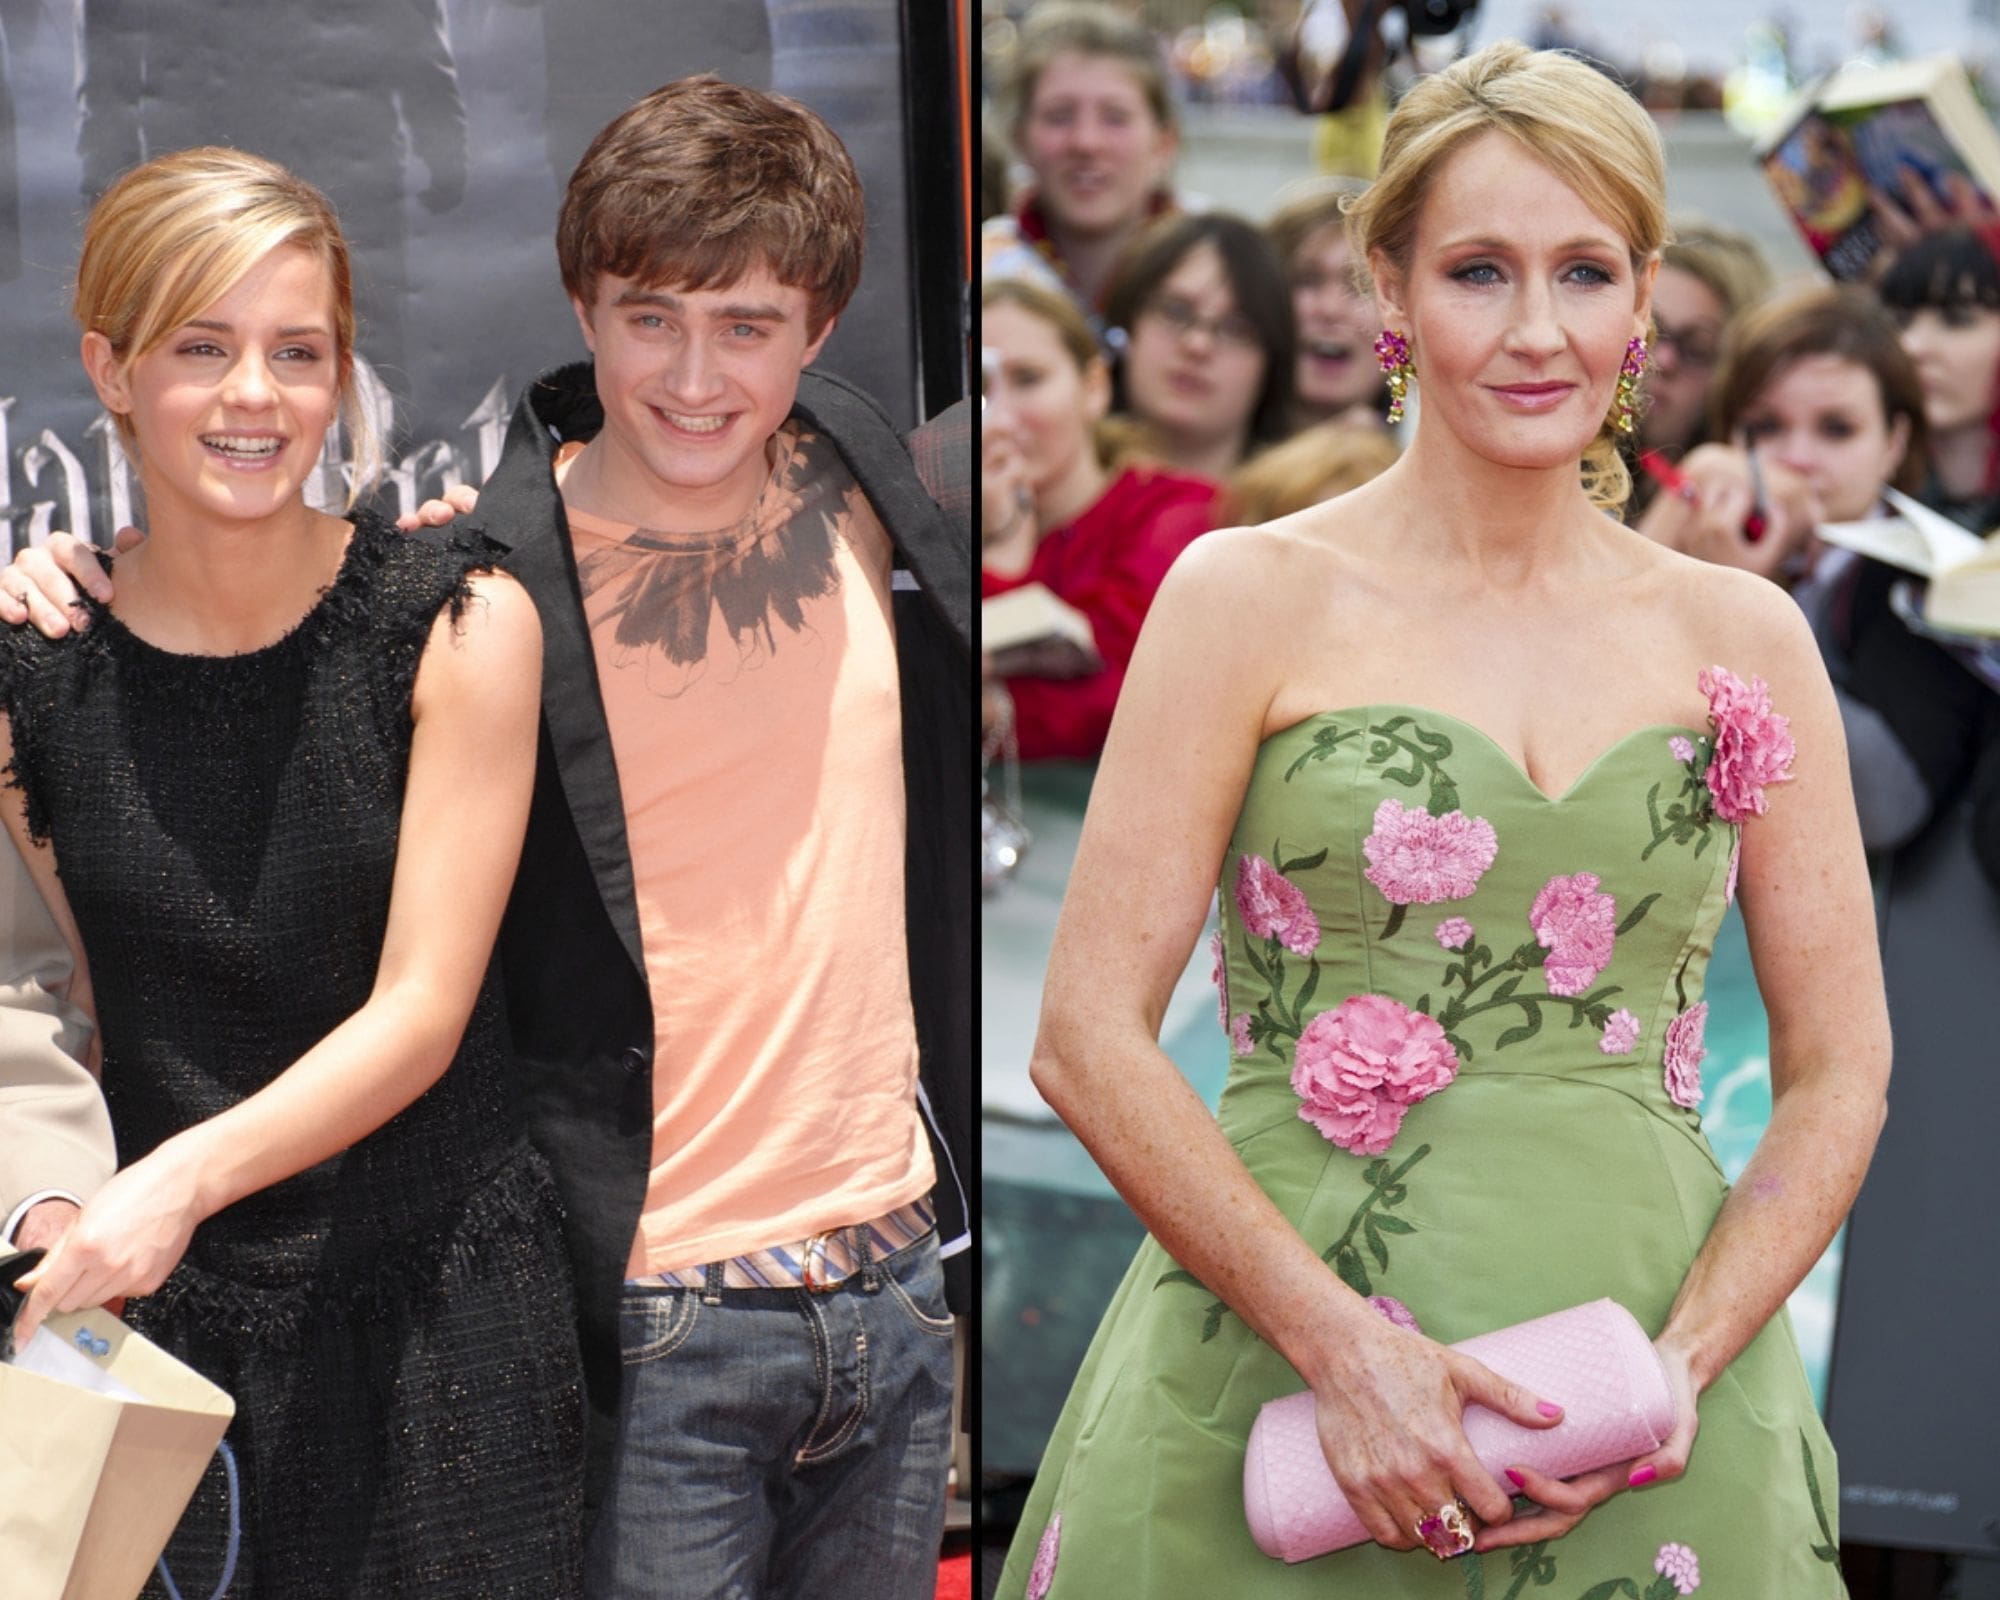 Fans Defend Daniel Radcliffe and Emma Watson After JK Rowling Said She Would Never Forgive Them